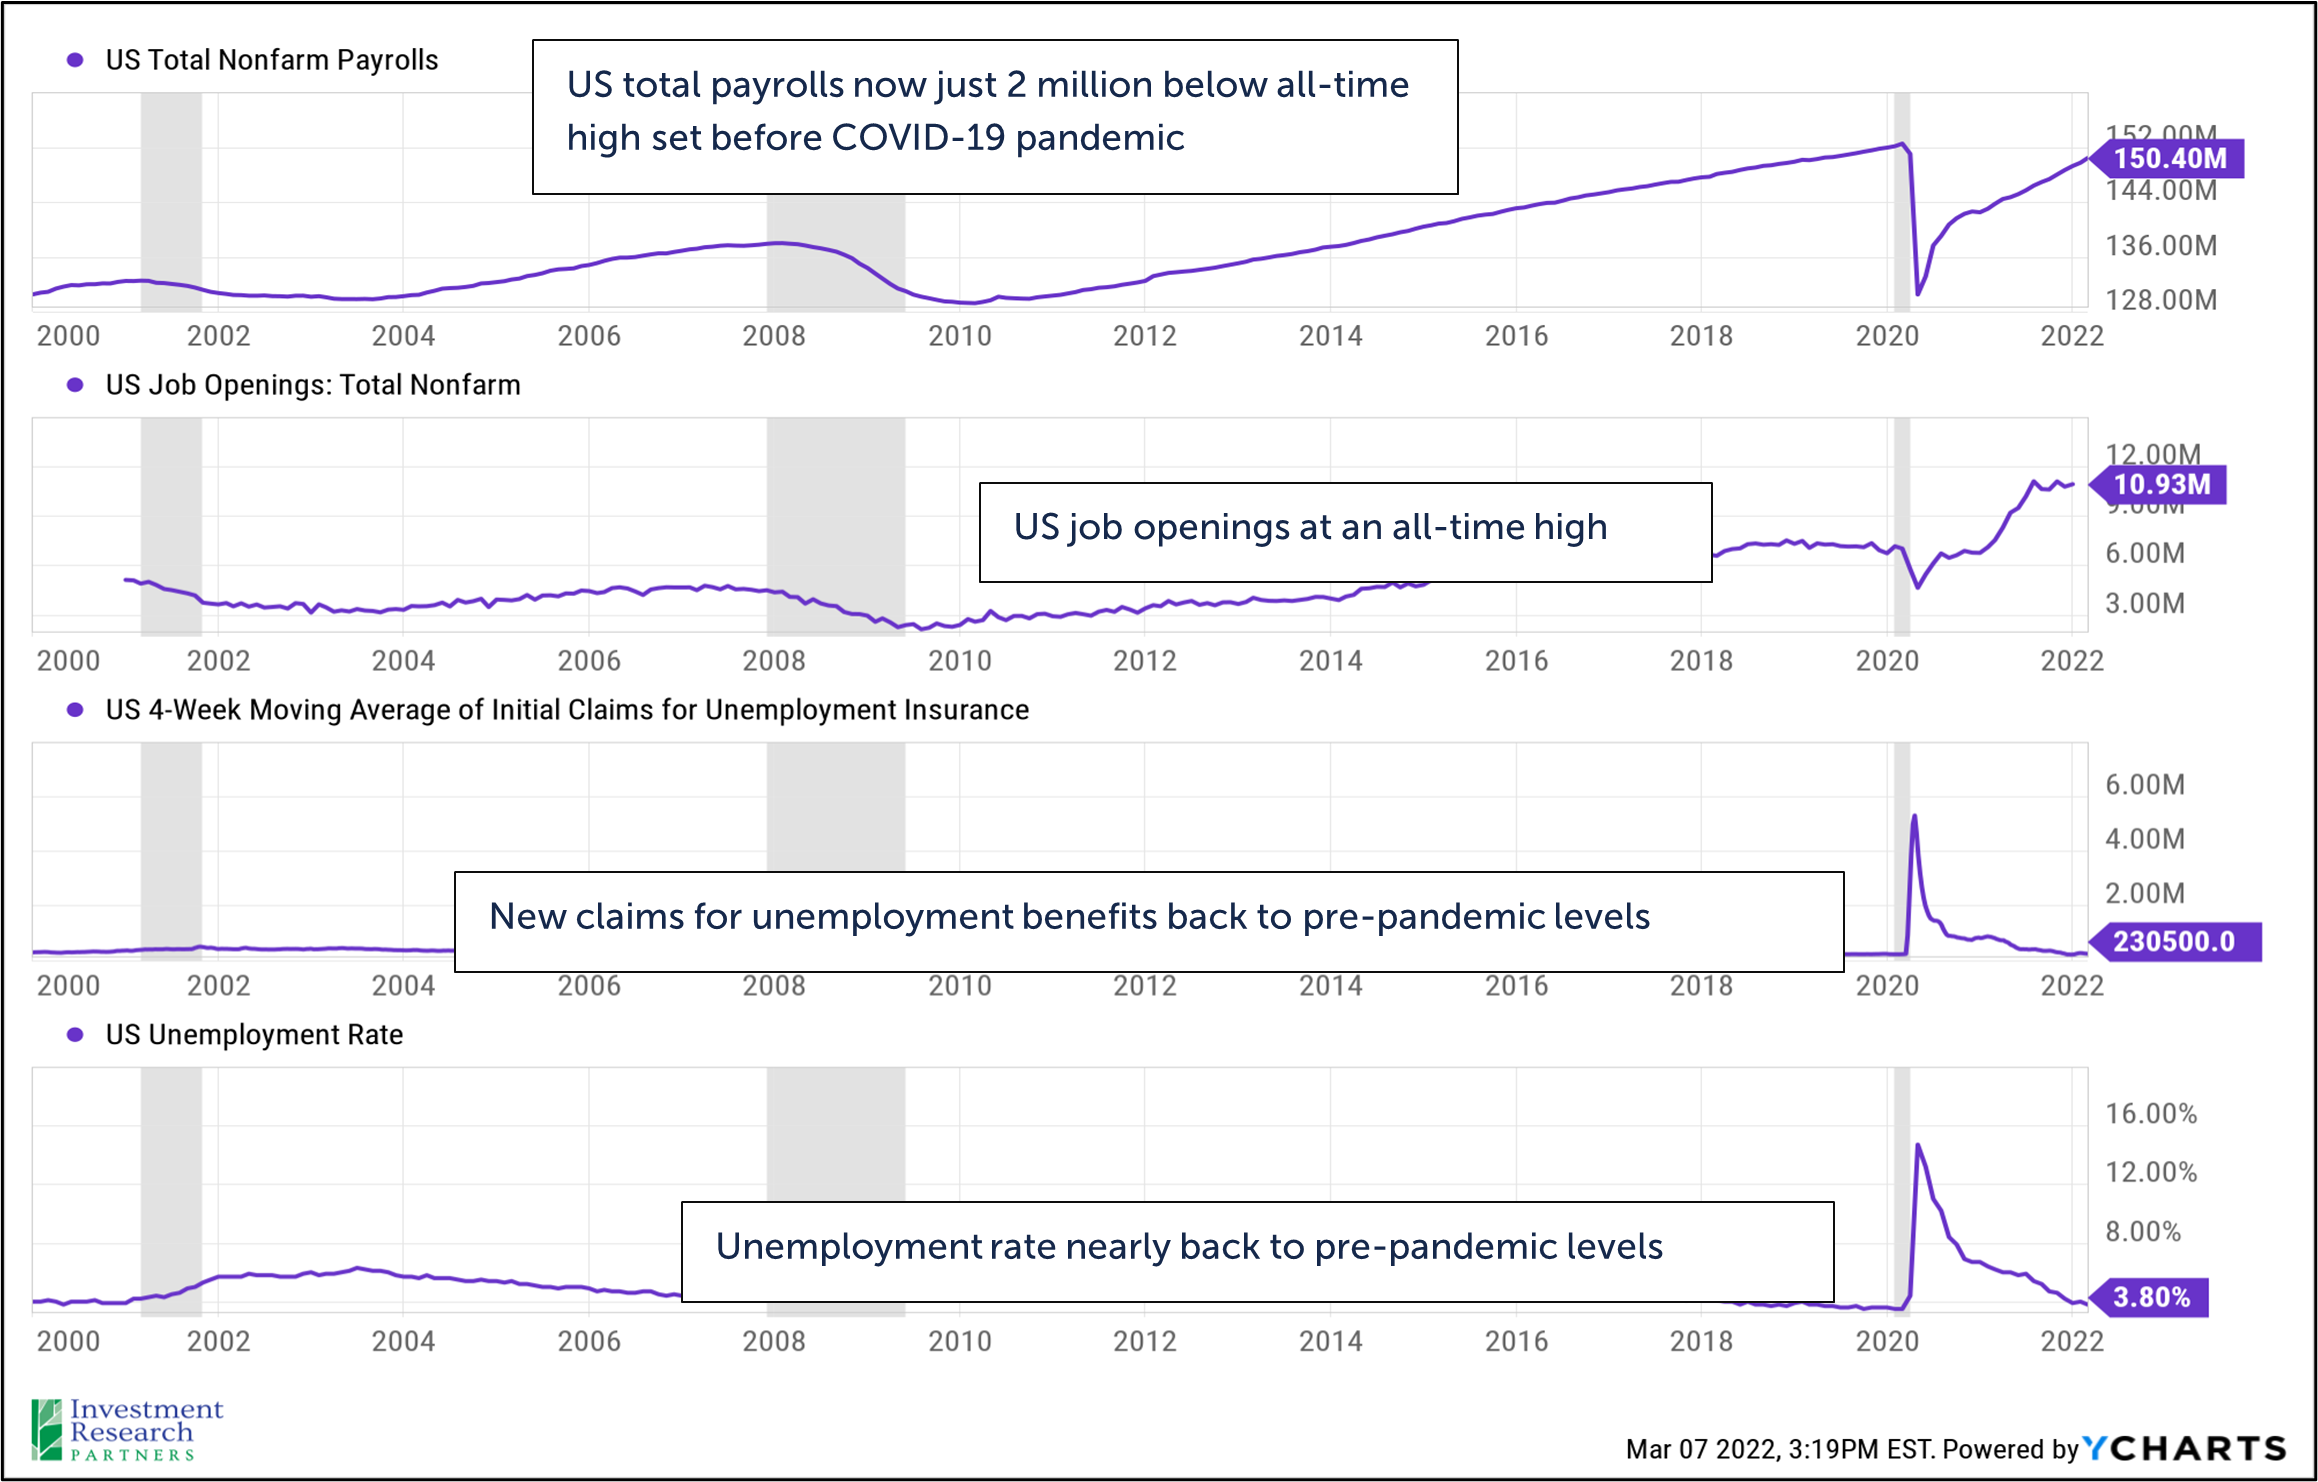 Line graphs depicting US Total Nonfarm Payrolls, US Job Openings: Total Nonfarm, US 4-Week Moving Average of Initial Claims for Unemployment Insurance, and US Unemployment Rate